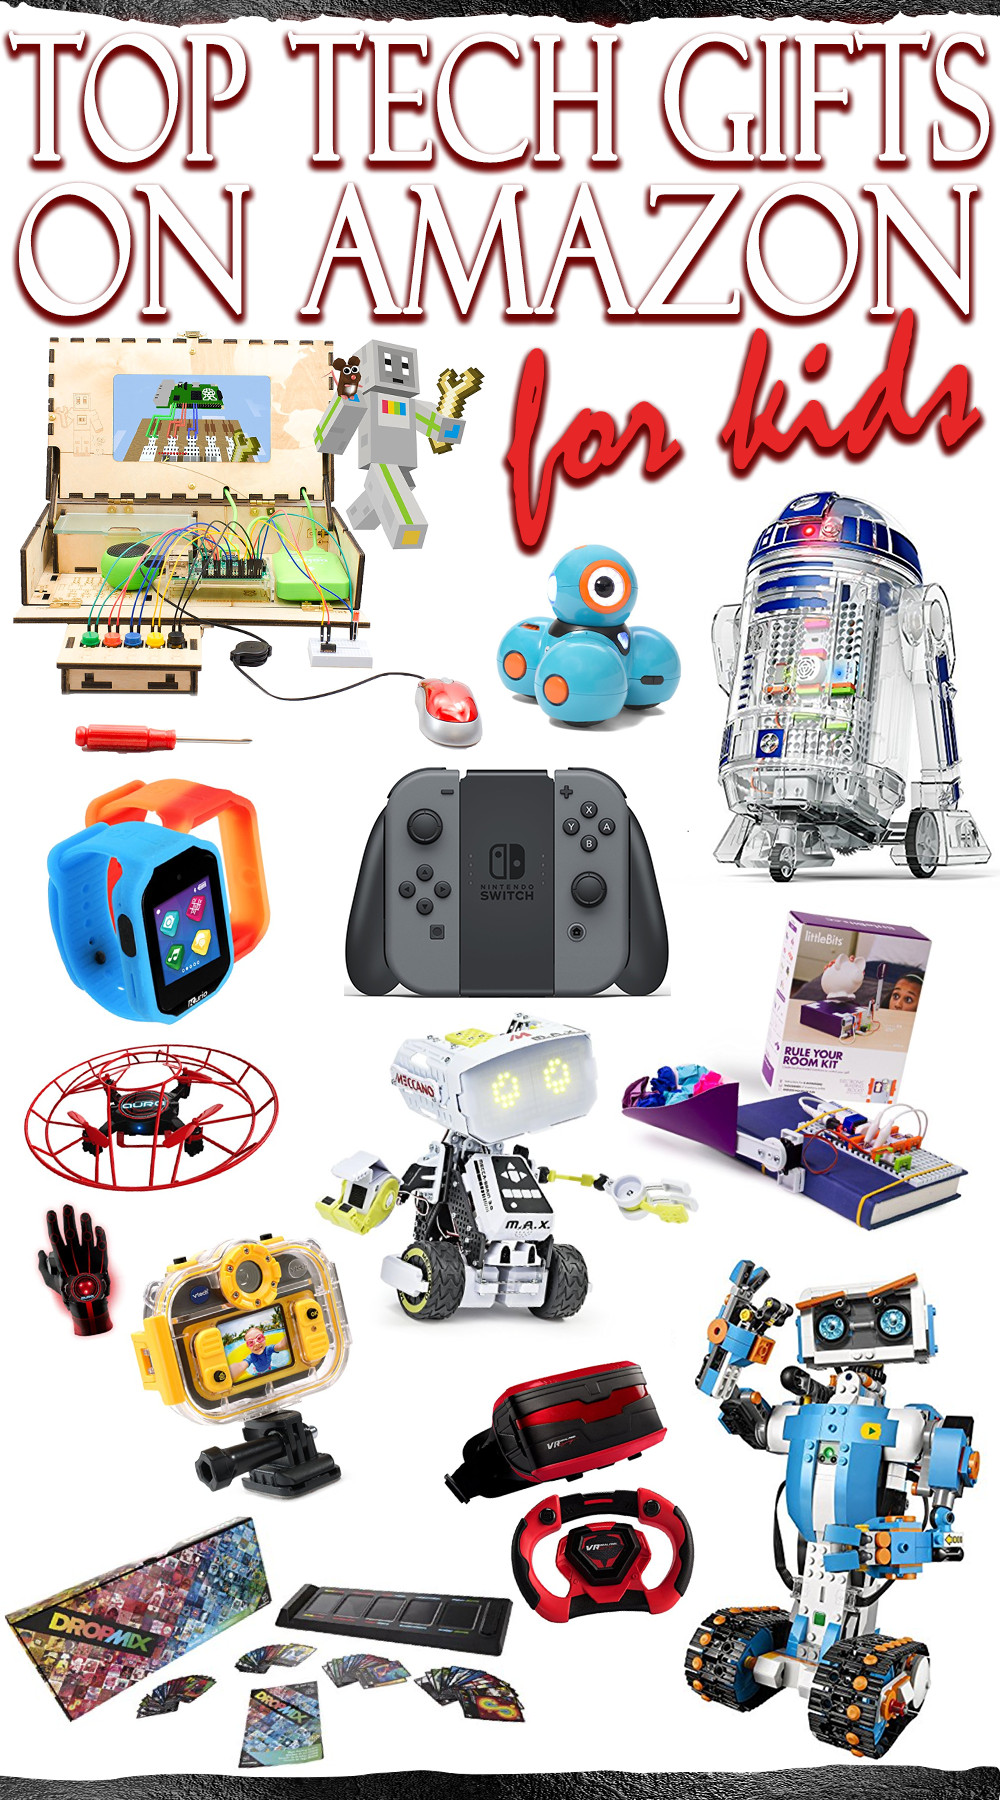 Top Technology Gifts For Kids
 Top Tech Gifts for Kids on Amazon